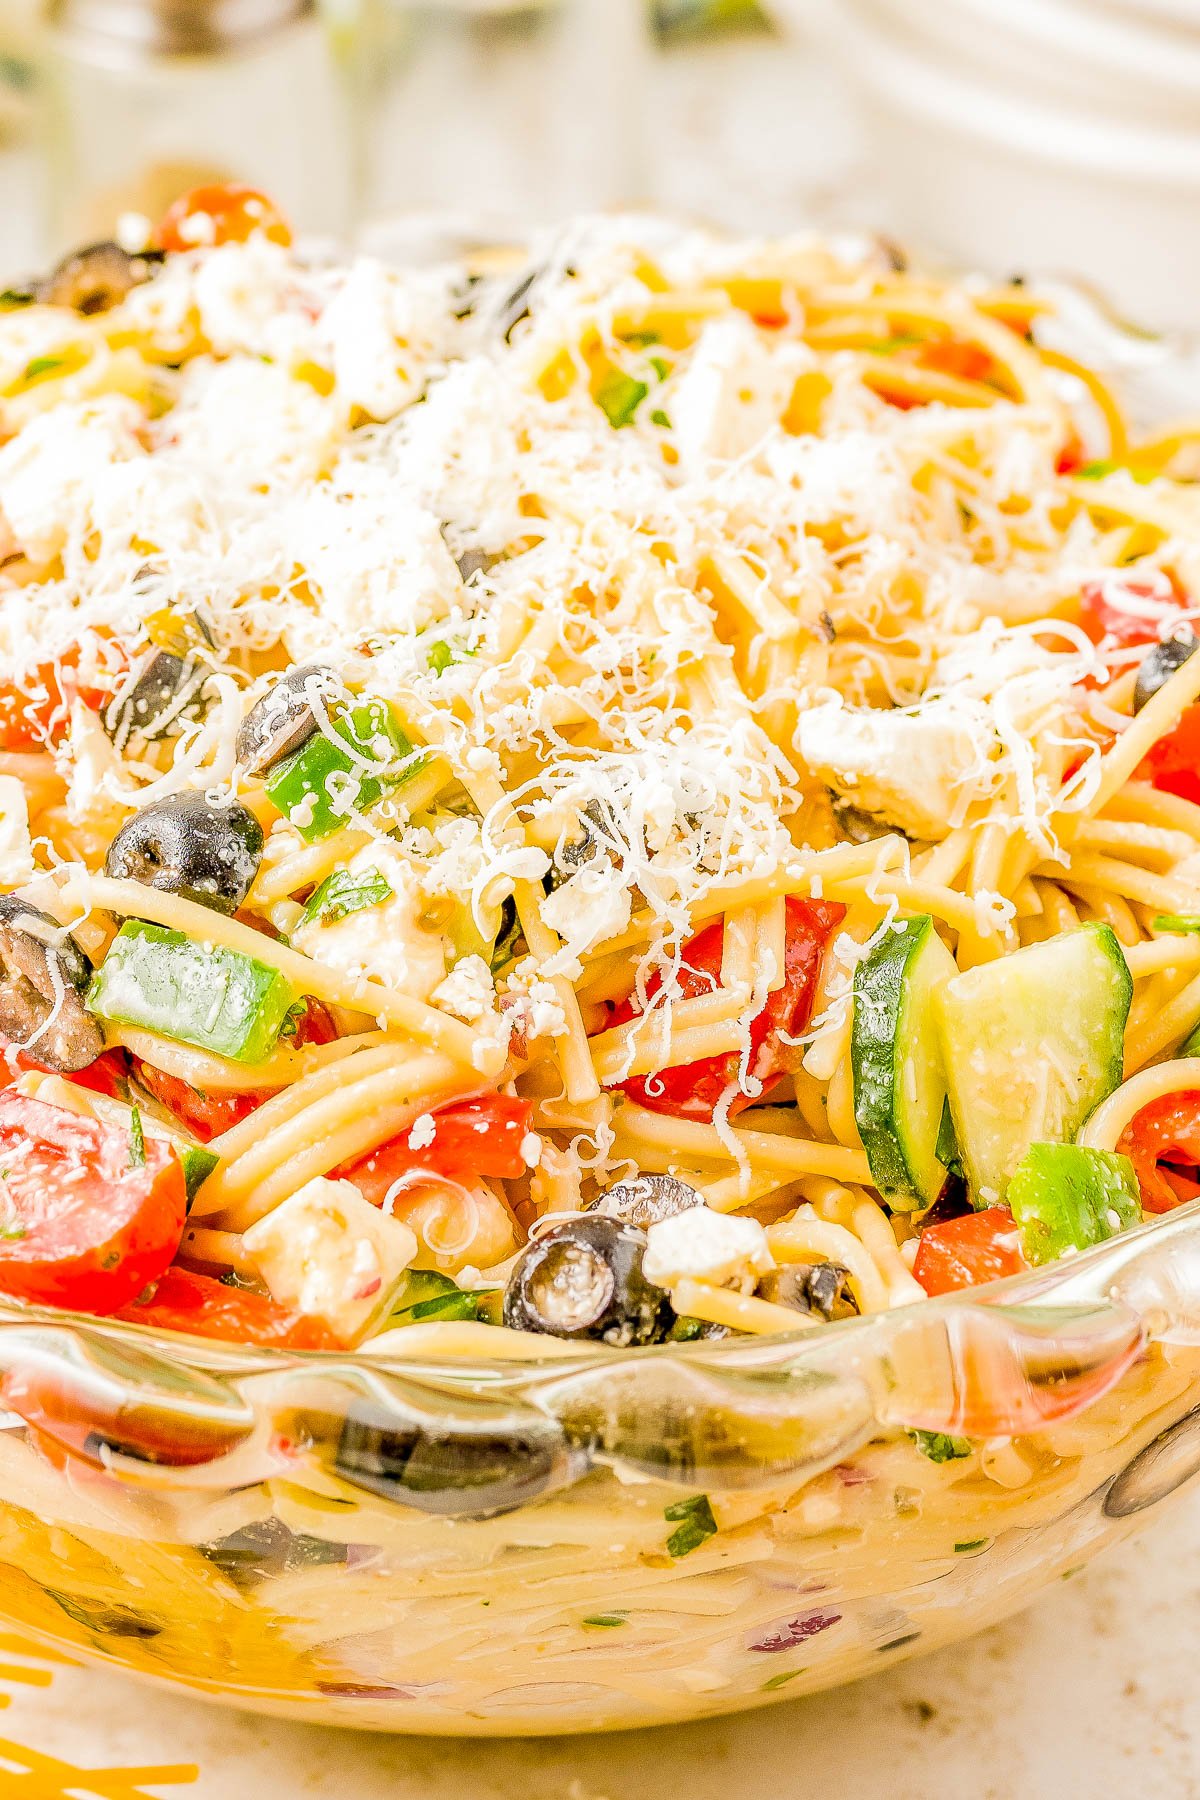 Spaghetti Pasta Salad - If you need a FAST and EASY hit for your next potluck, summer picnic, or barbeque, look no further than this spaghetti pasta salad recipe! Served chilled, it’s full of juicy cherry tomatoes, cucumbers, bell peppers, salty olives, plenty of Parmesan and feta cheese, and coated with tangy Italian dressing so it's bursting with FLAVOR!